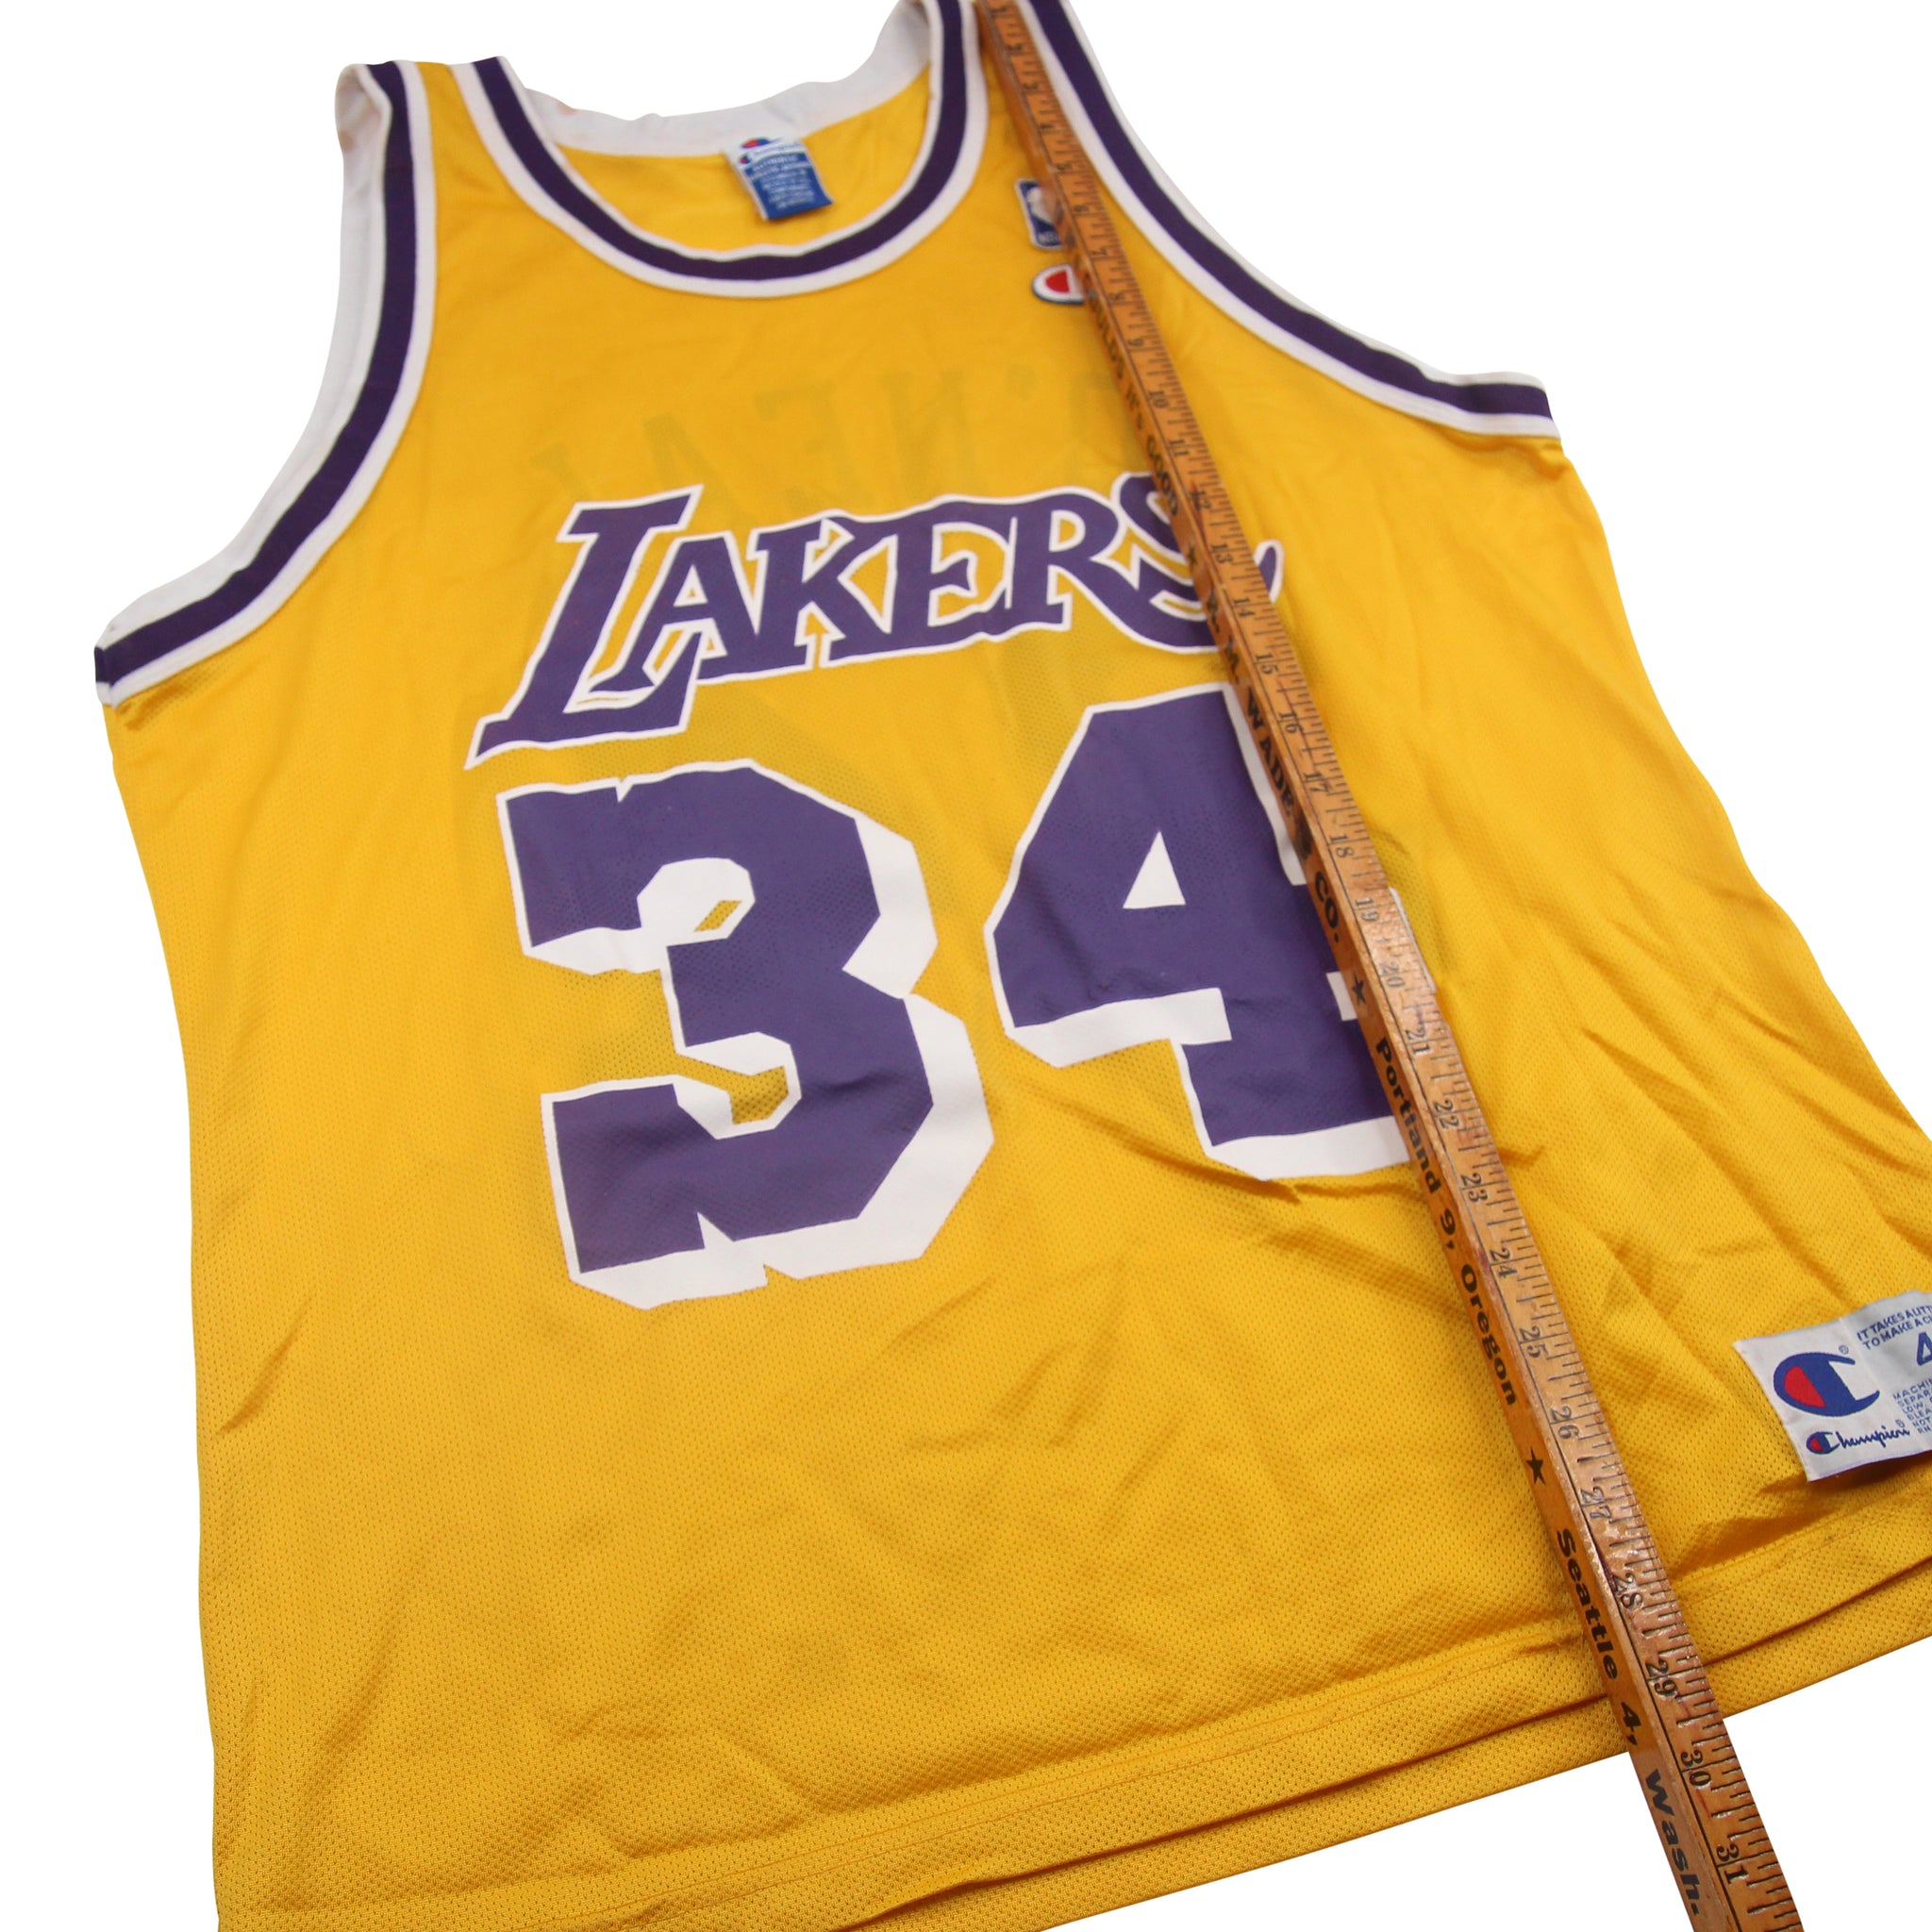 Champion Shaquille O'Neal NBA Jerseys for sale